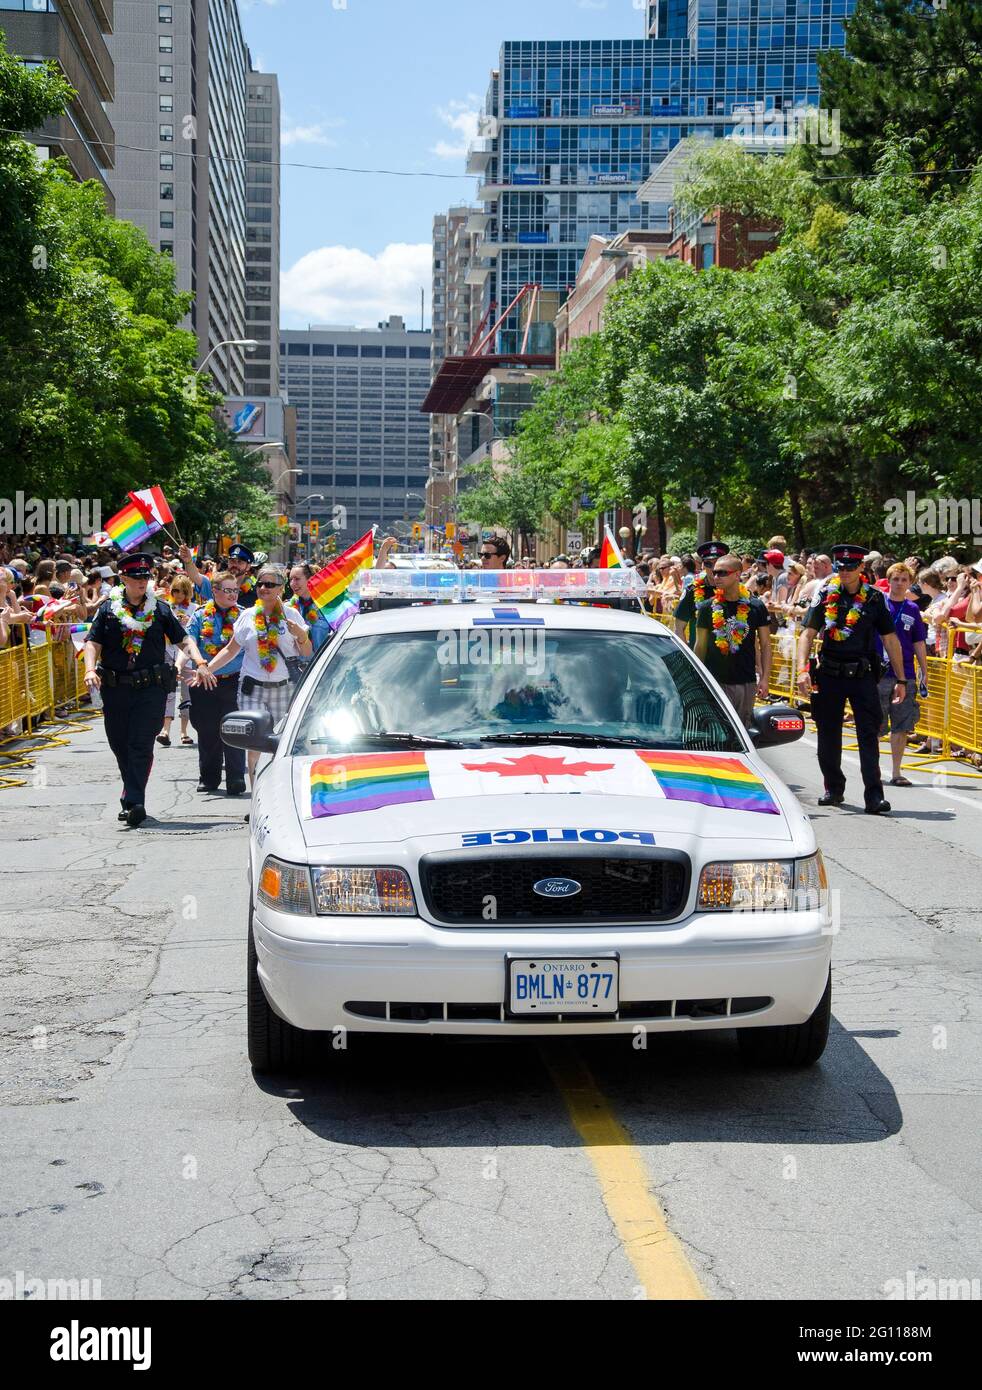 Toronto Pride Parade scenes: A police car decorated with gay pride flags oversees a pride parade while demonstraters follow behind in the street. Stock Photo